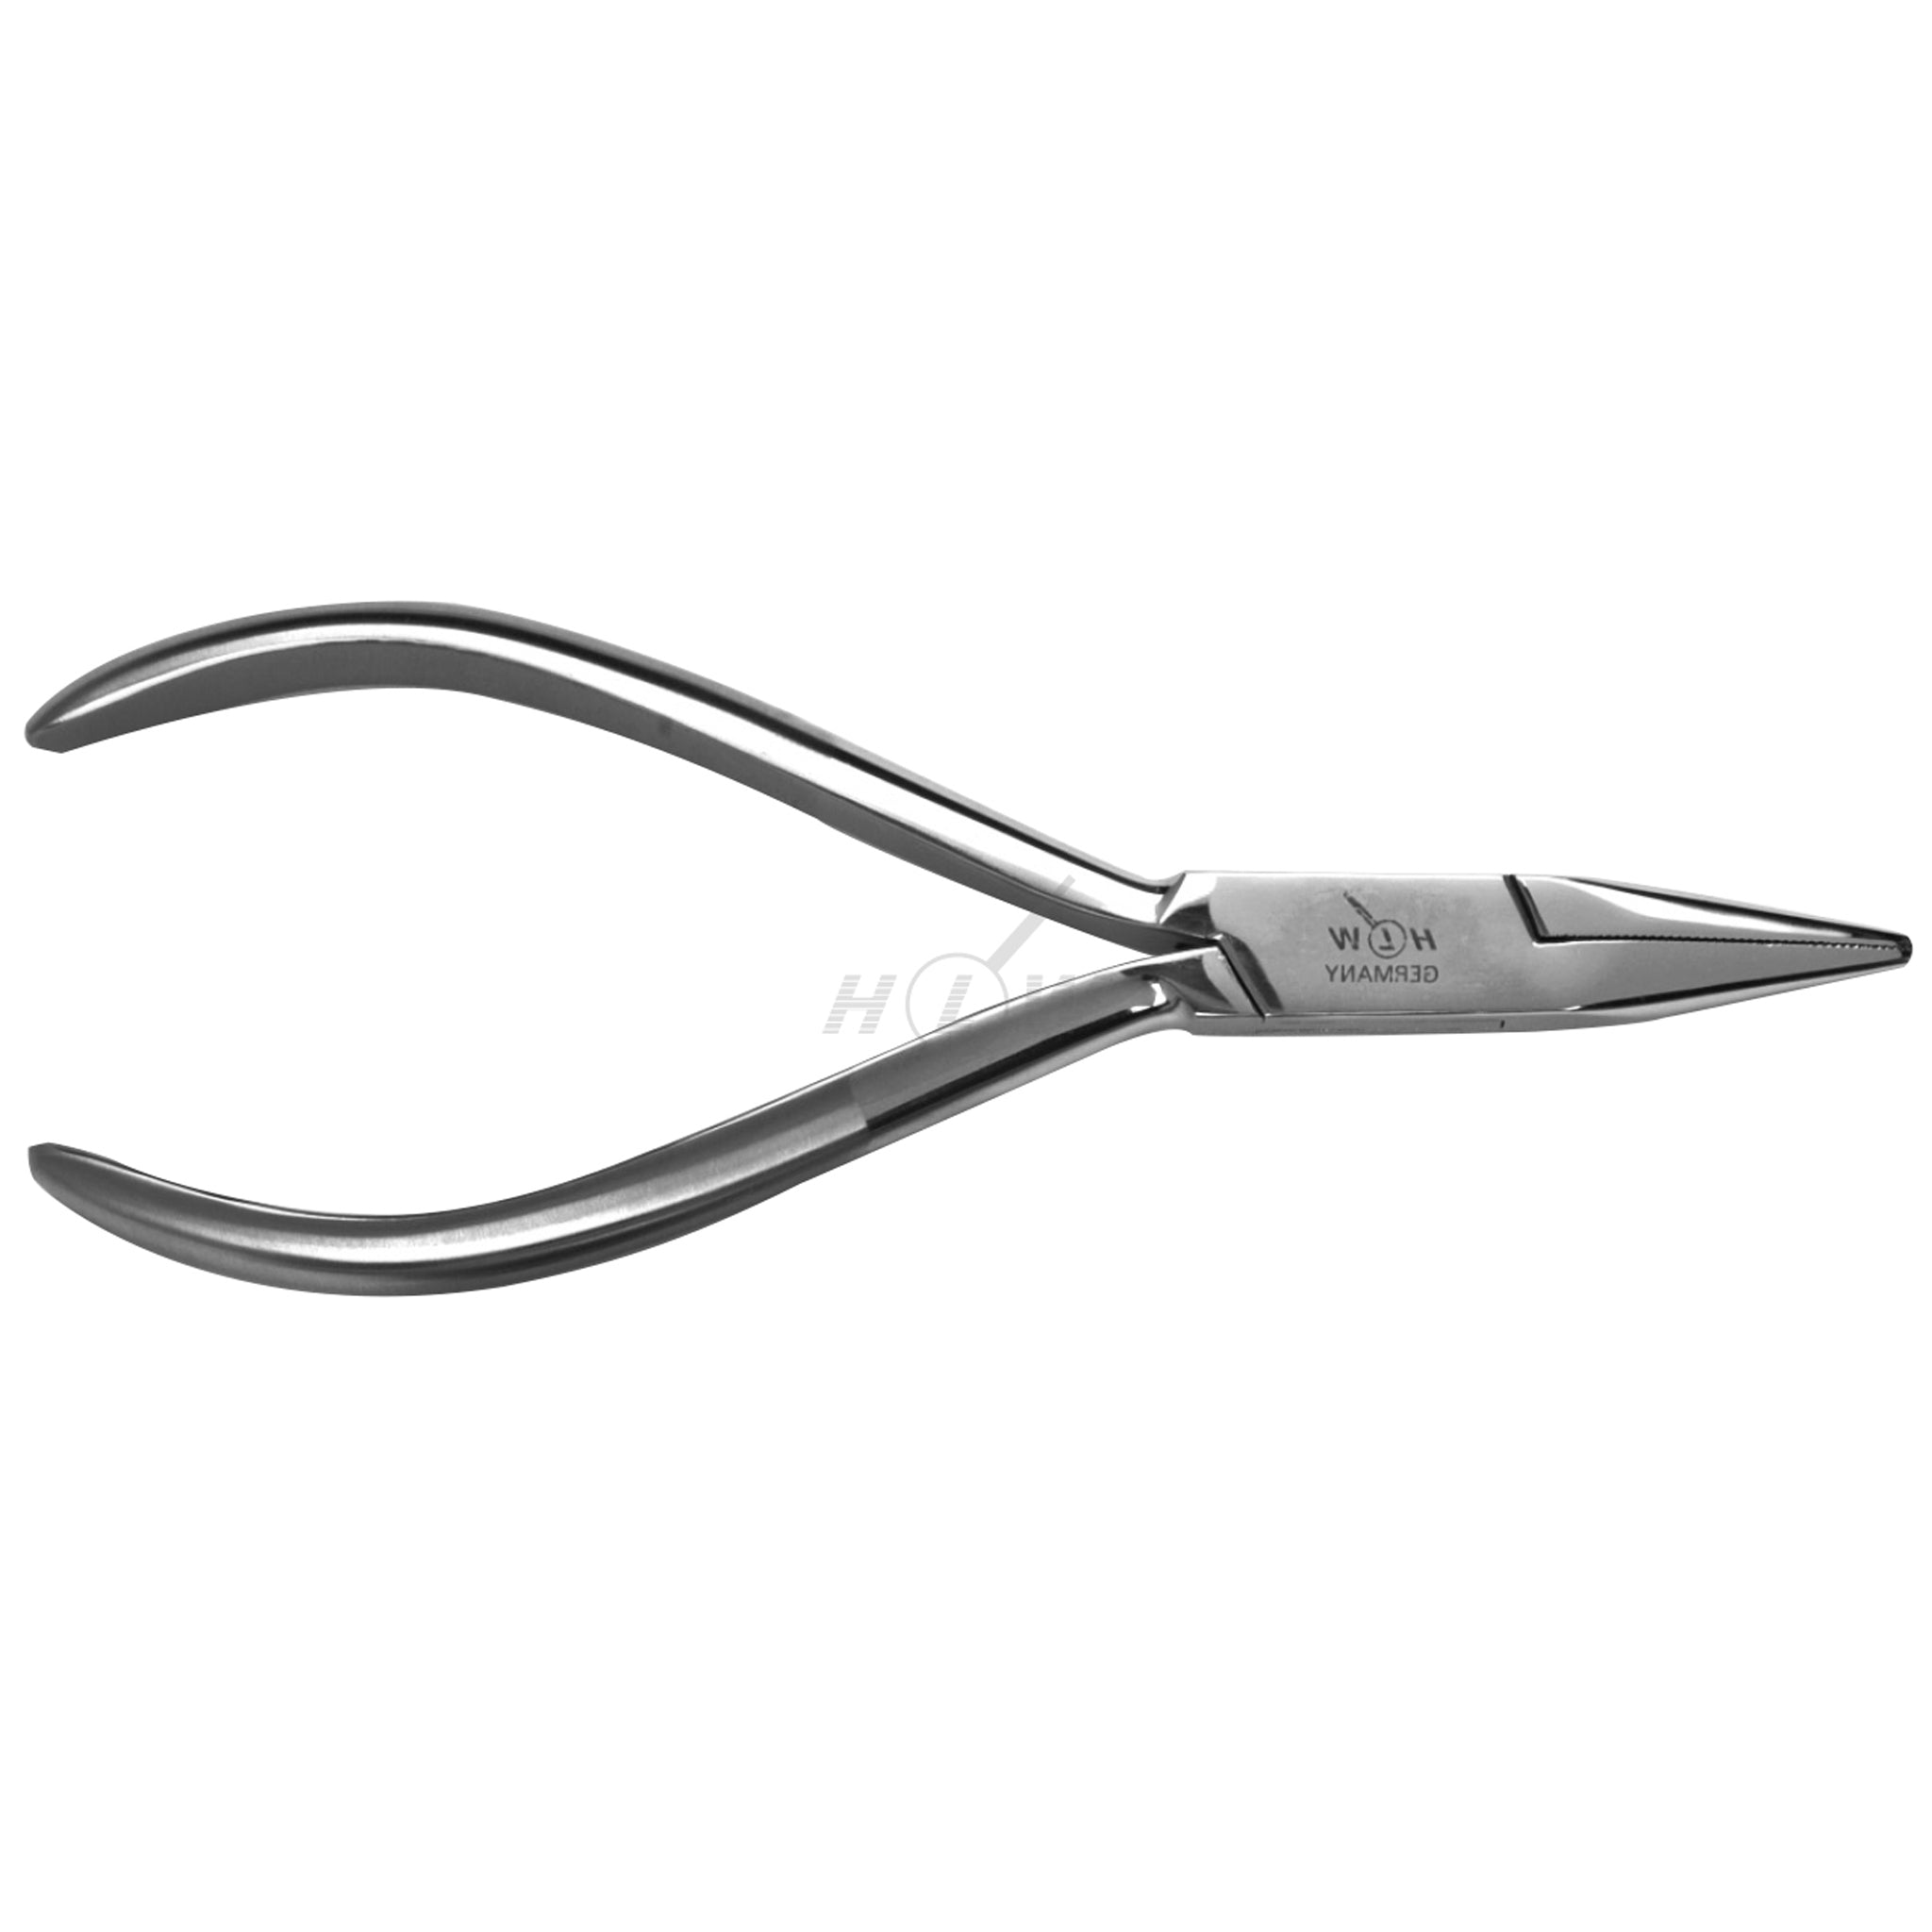 Orthodontic flat-nose pliers